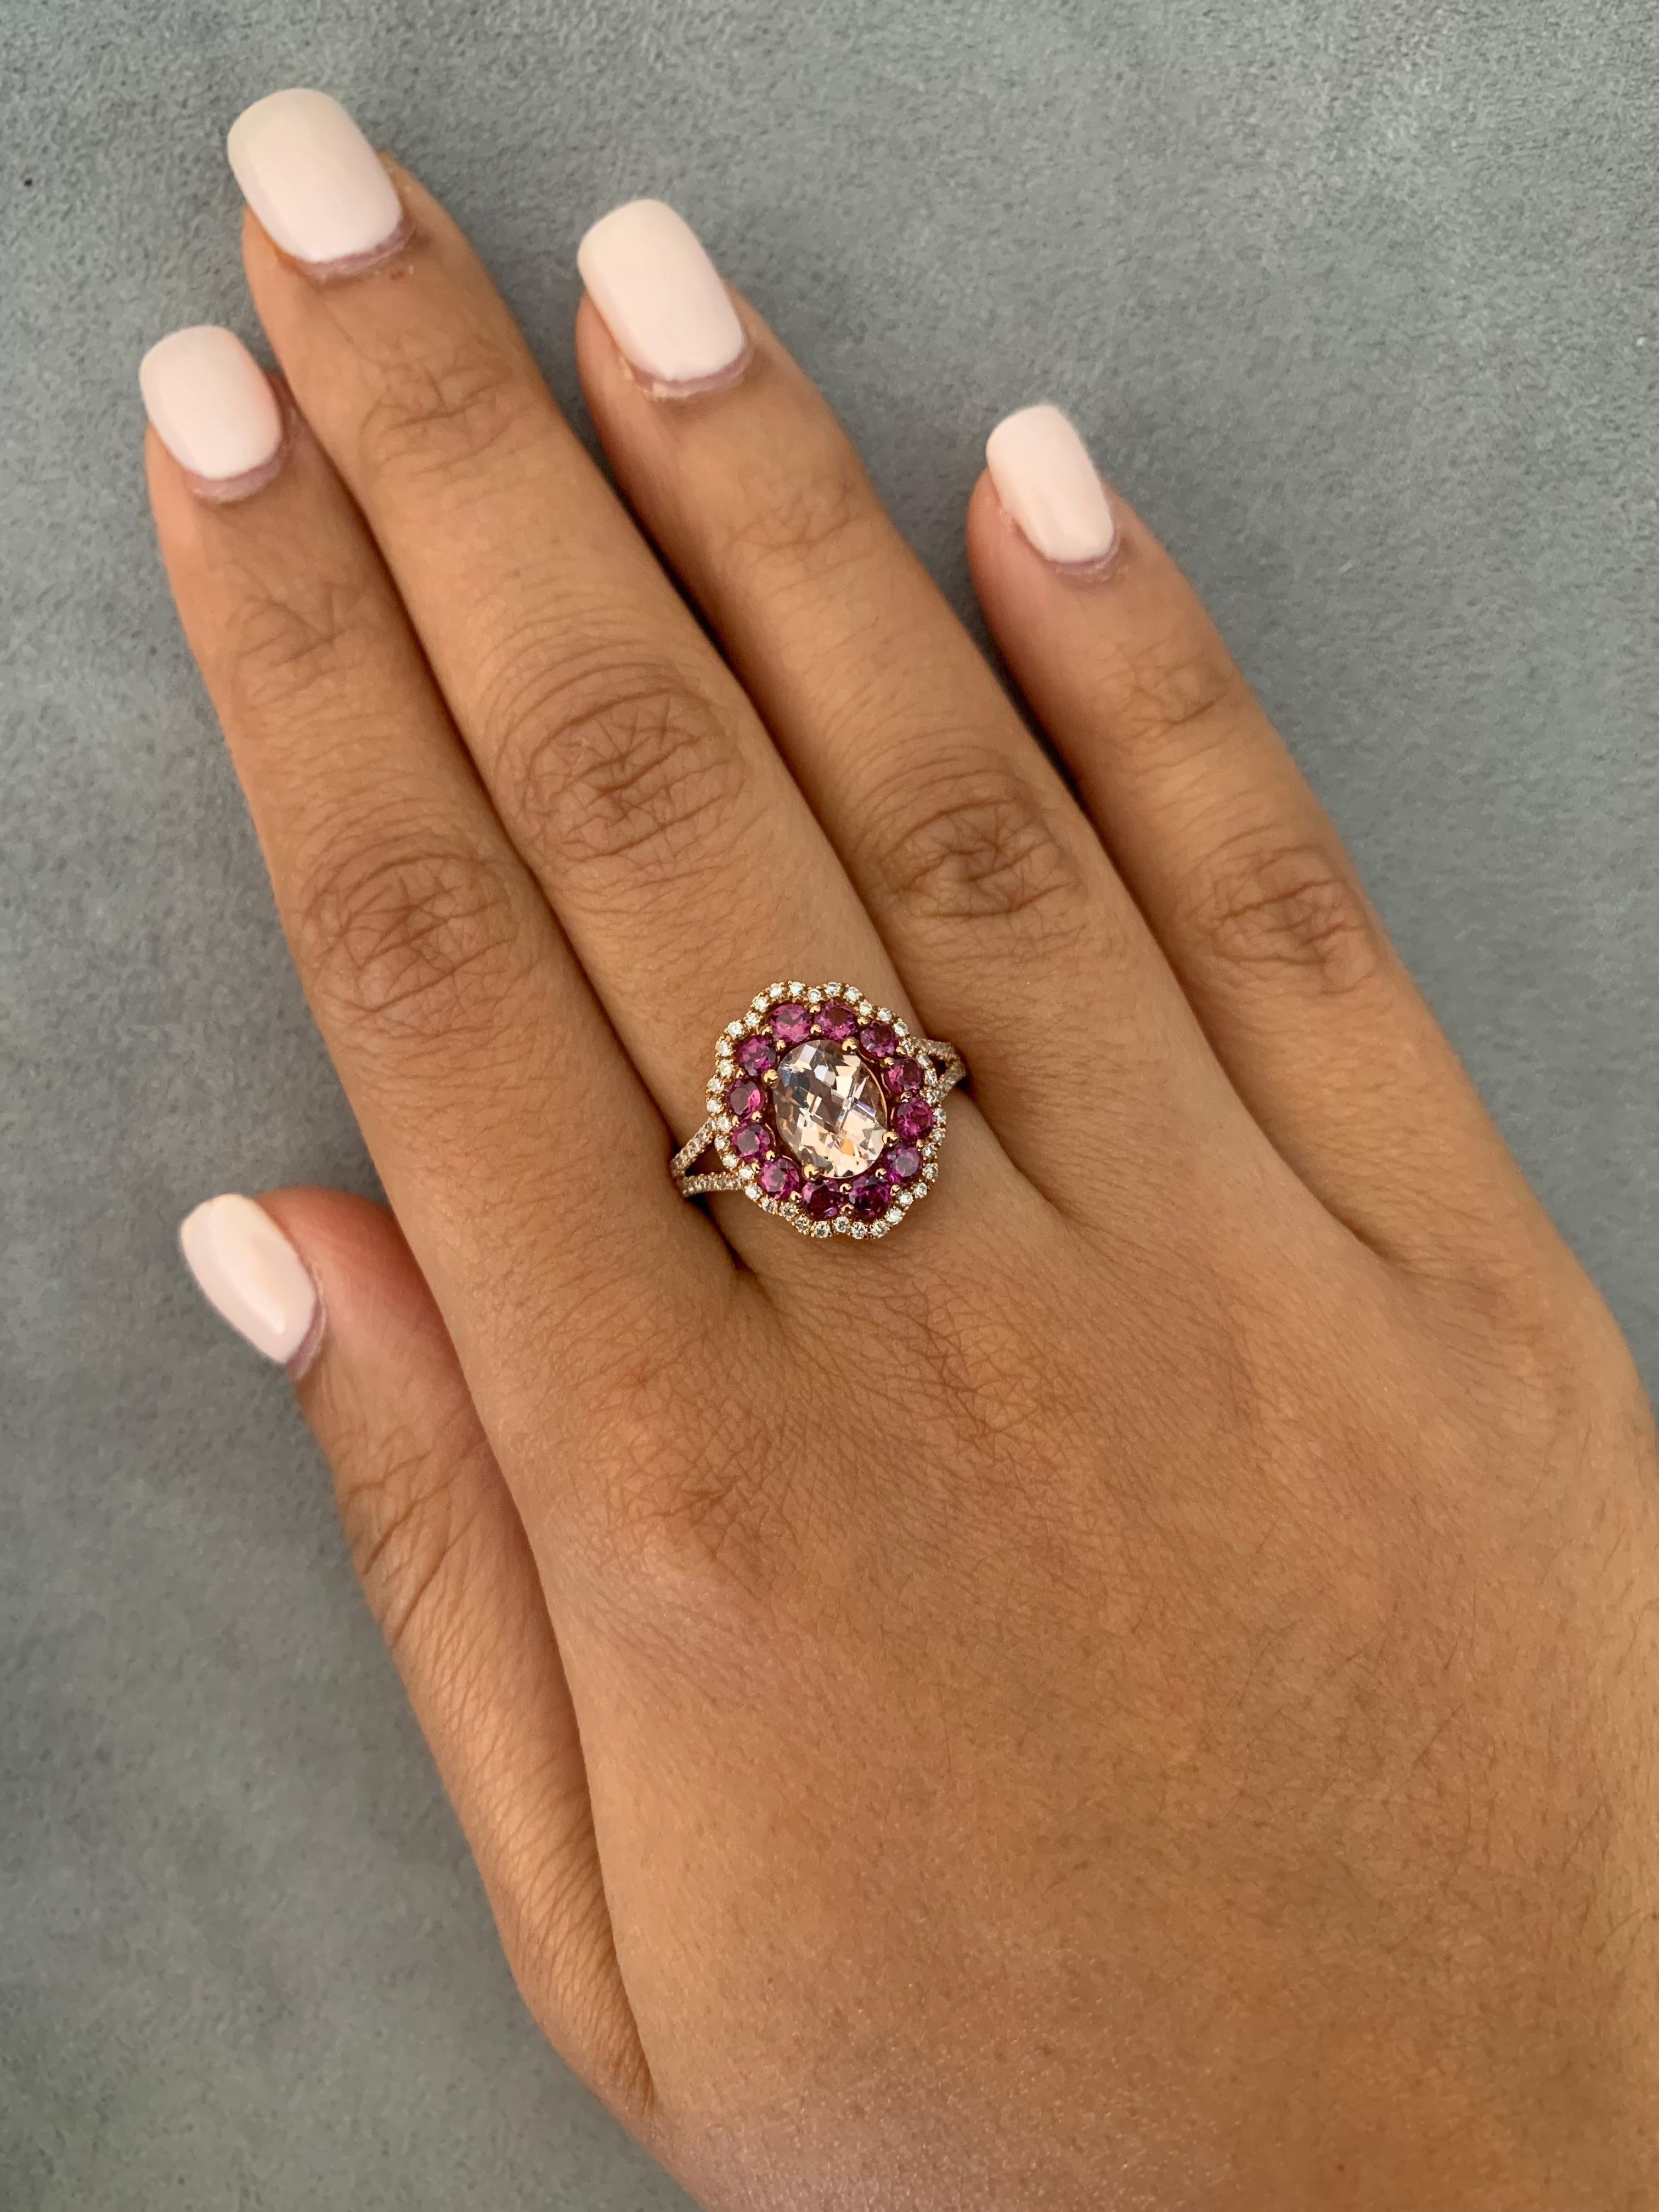 This collection features an array of magnificent morganites! Accented with diamonds these rings are made in rose gold and present a classic yet elegant look. The vibrant addition of red rhodolites perfectly assists the peachy hue of the morganite.